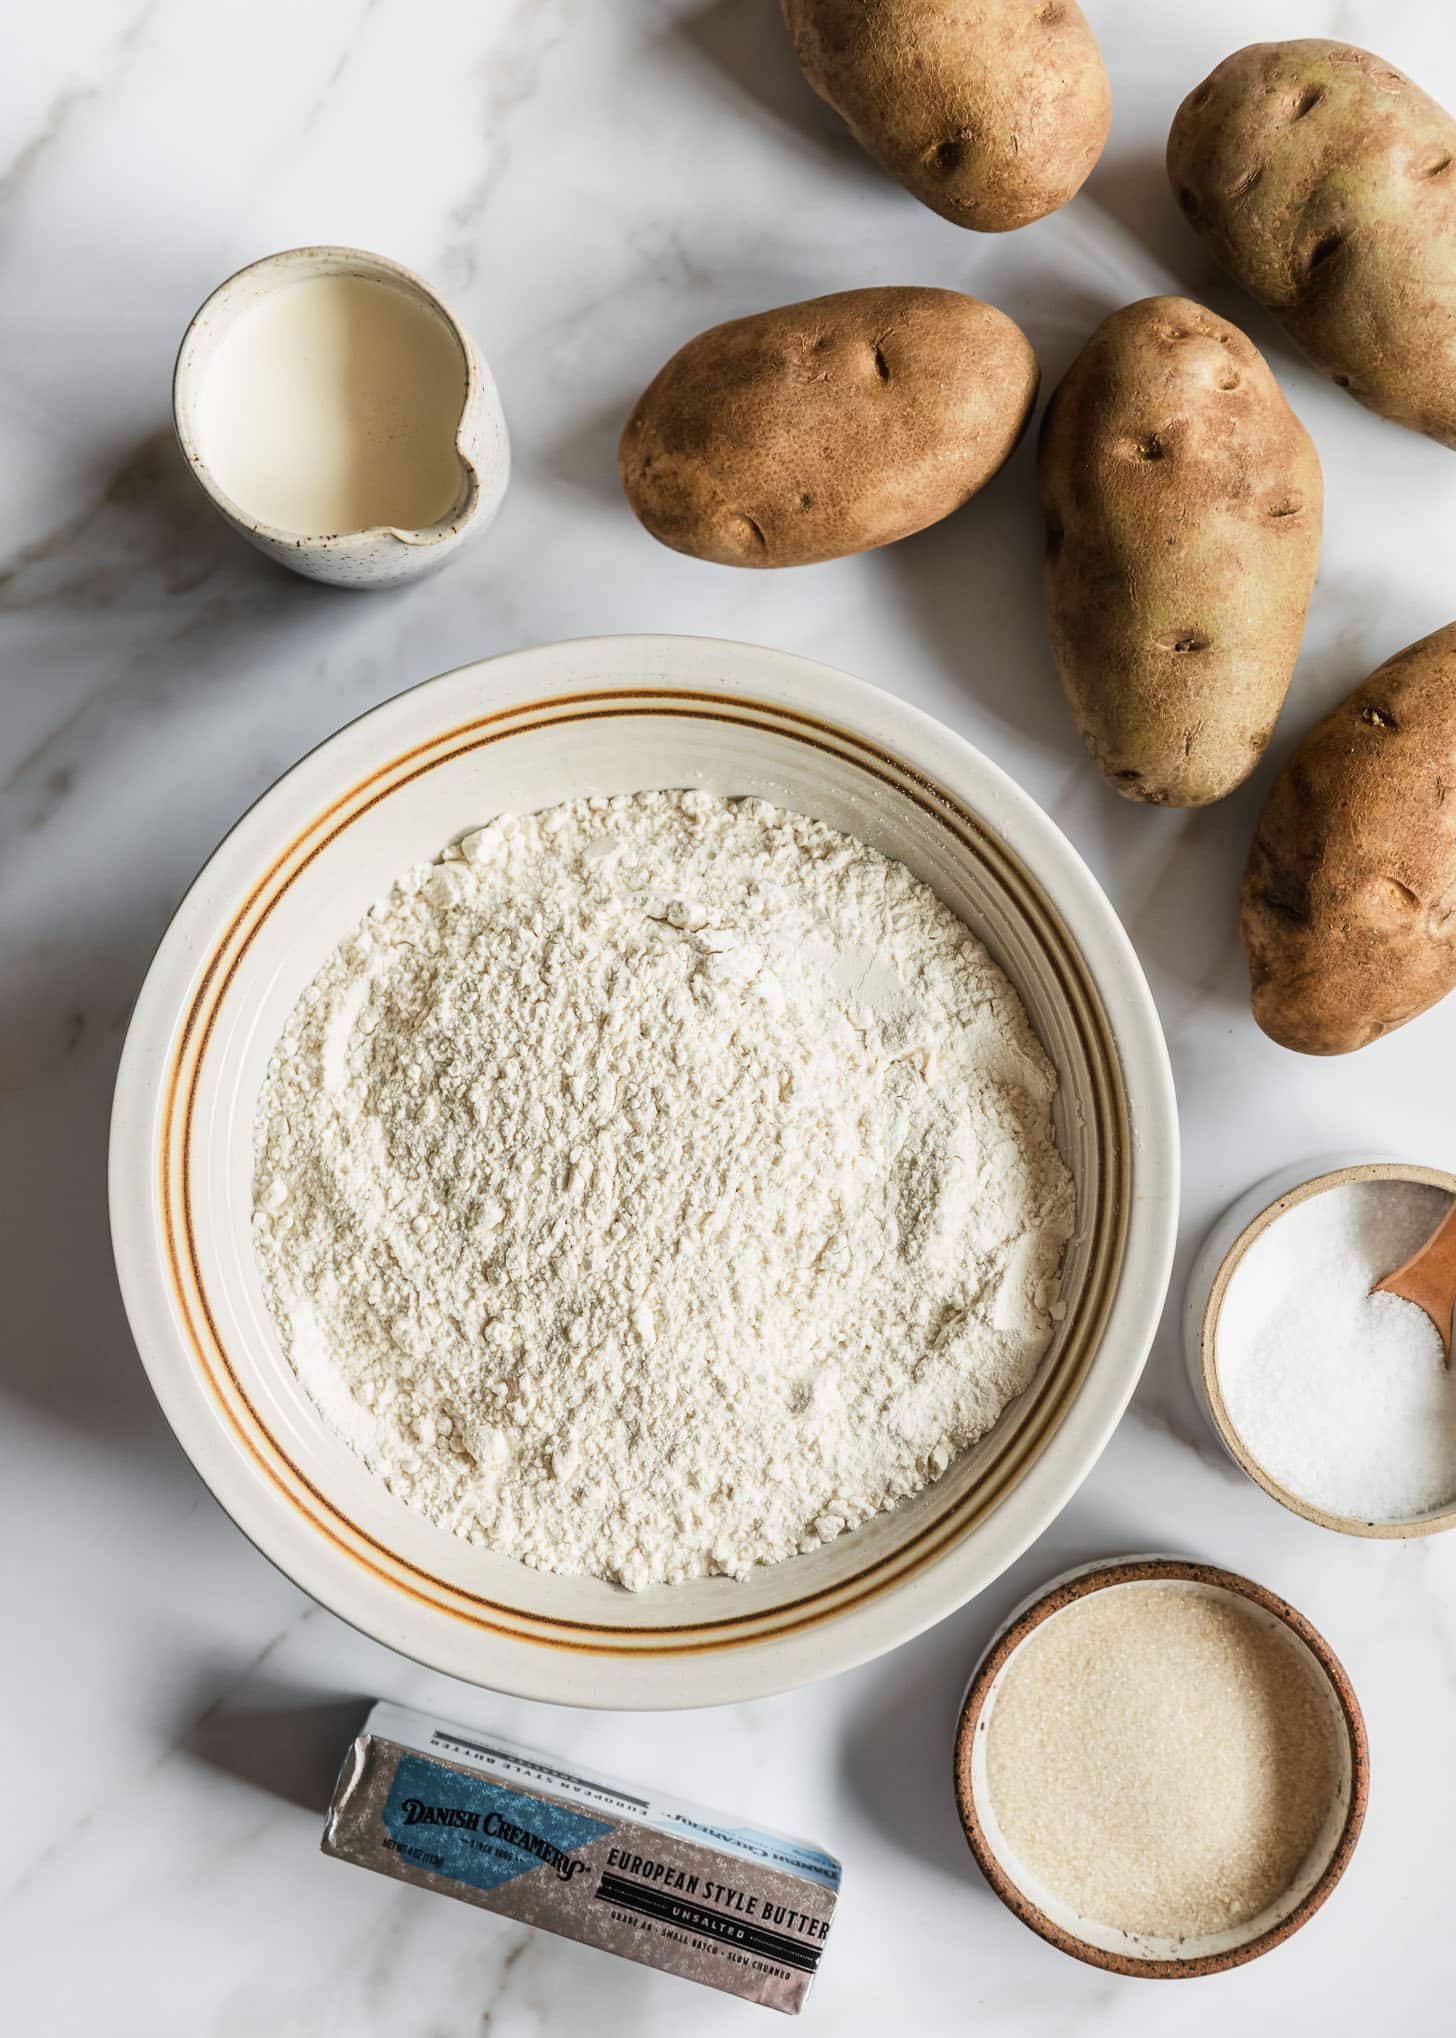 Potatoes, a white bowl of flour, a white bowl of salt, a white bowl of cream, a brown bowl of sugar, and a stick of butter on a white marble counter.